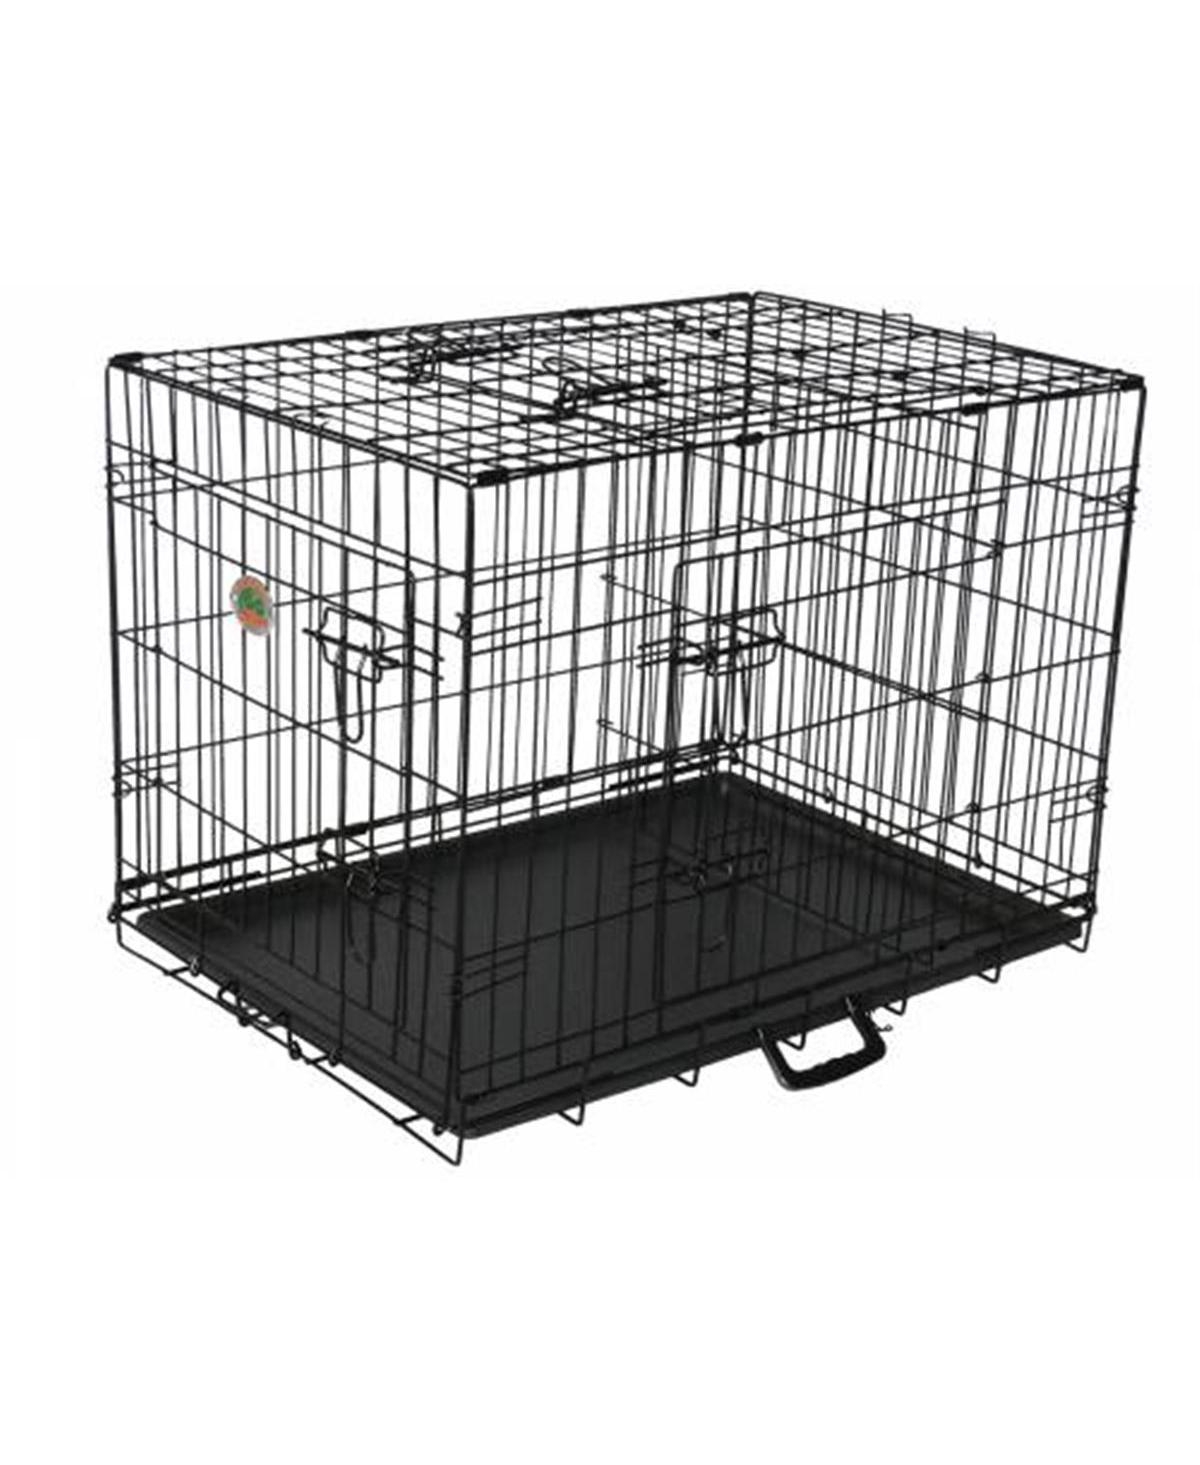 Td-42 42 in. Three-Door Metal Dog Crate with Divider - Open miscellaneous